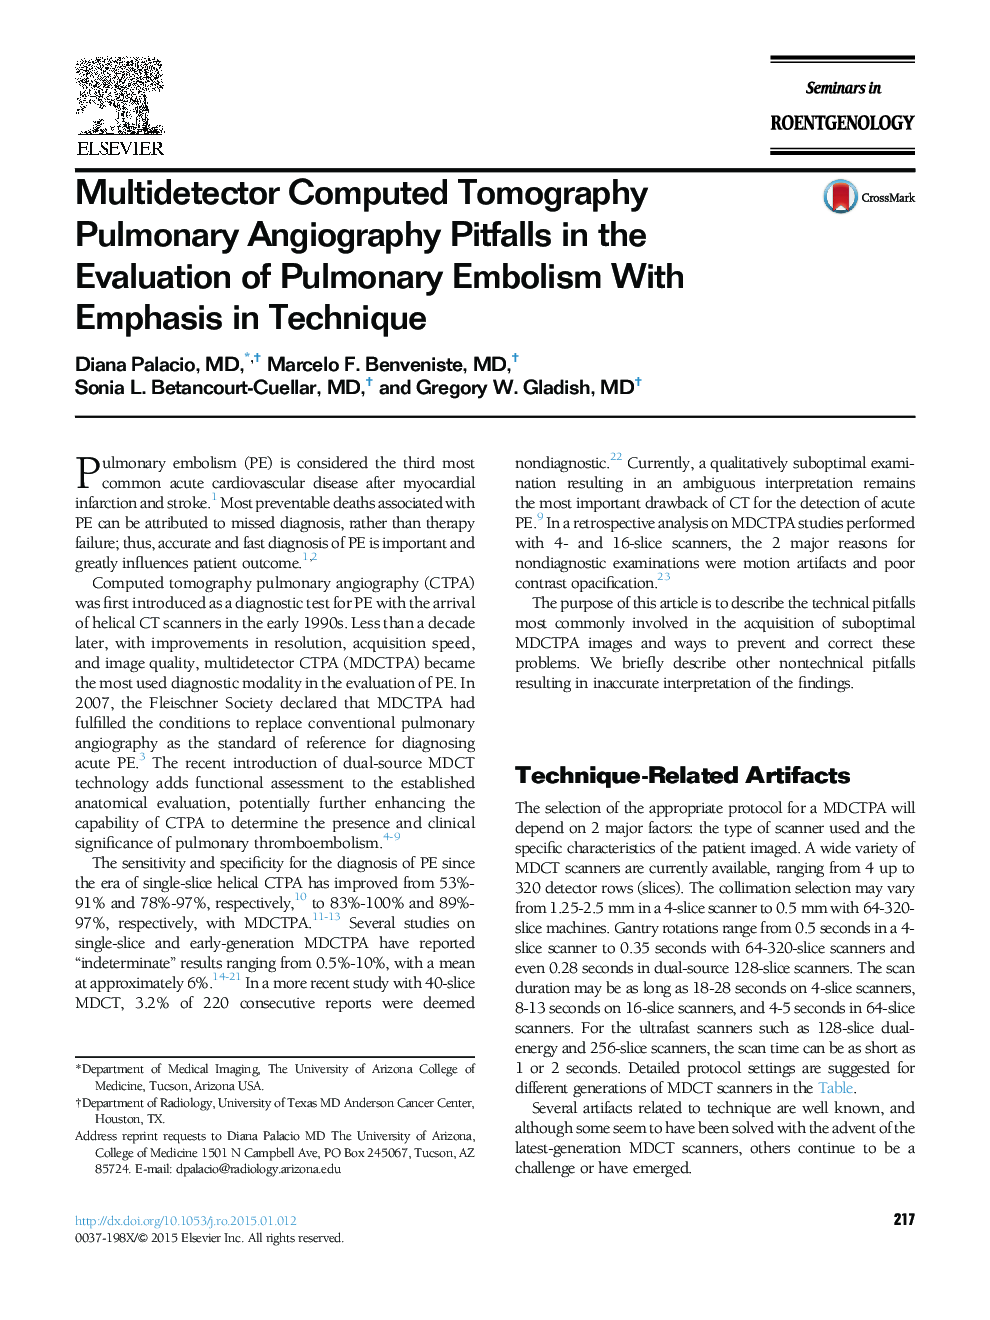 Multidetector Computed Tomography Pulmonary Angiography Pitfalls in the Evaluation of Pulmonary Embolism With Emphasis in Technique